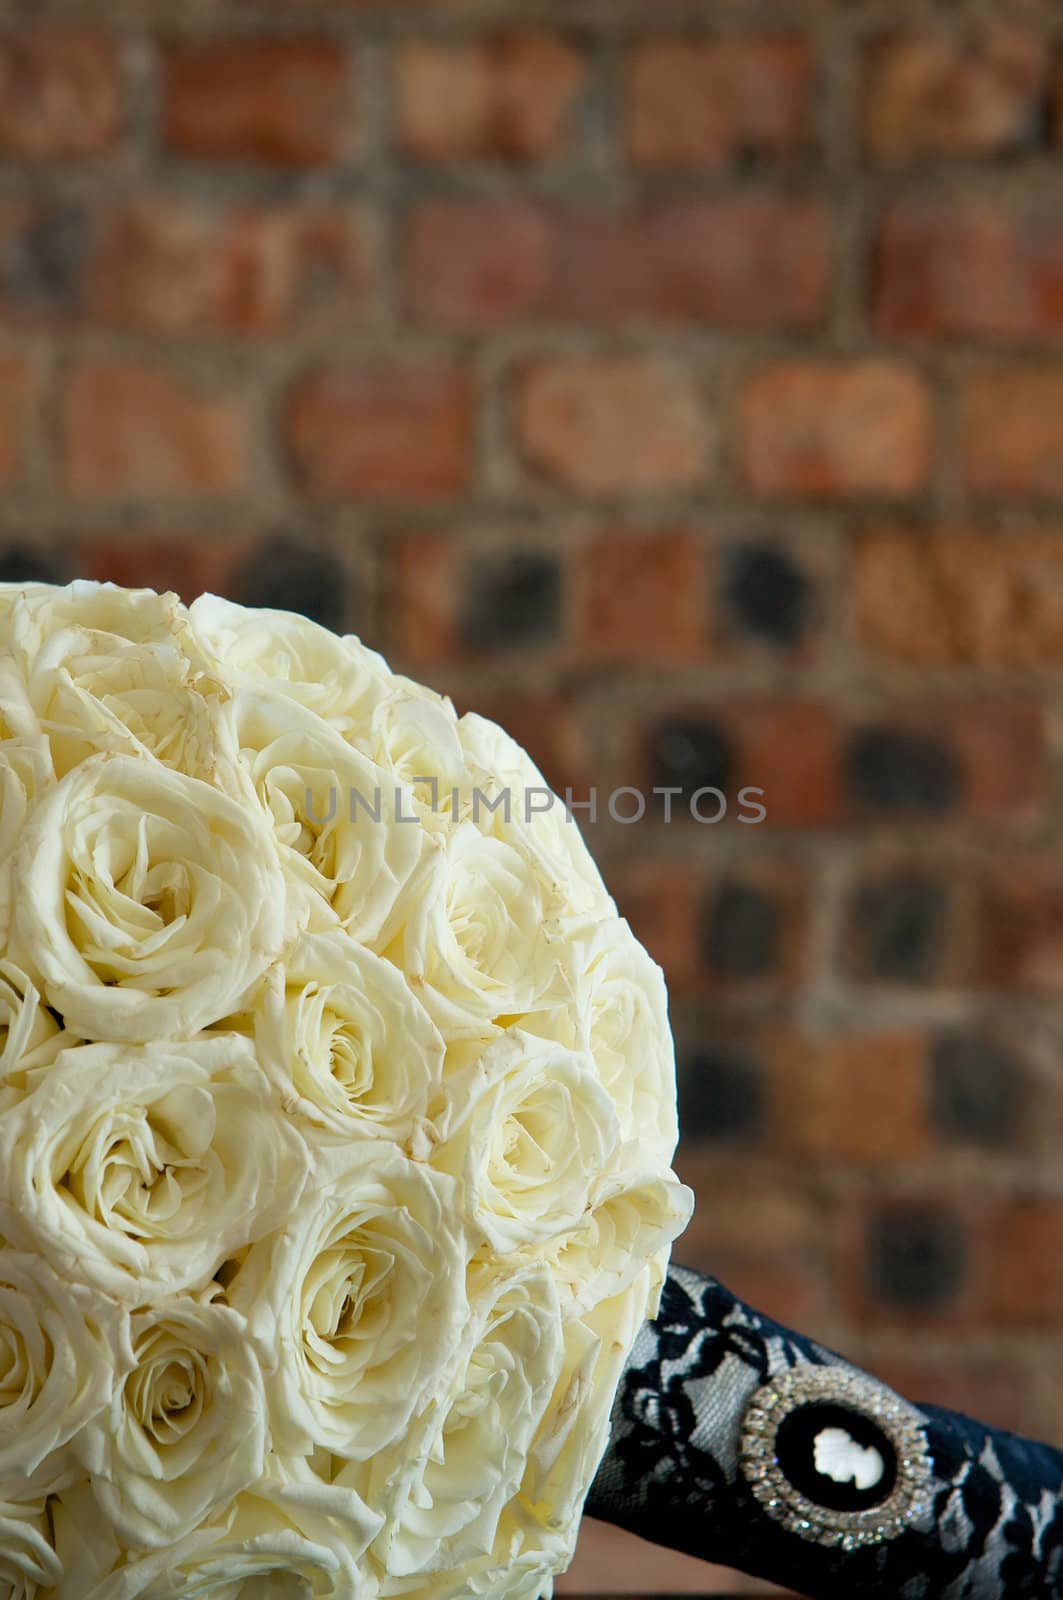 A bridal bouquet of flowers made with cream colored roses by Deimages